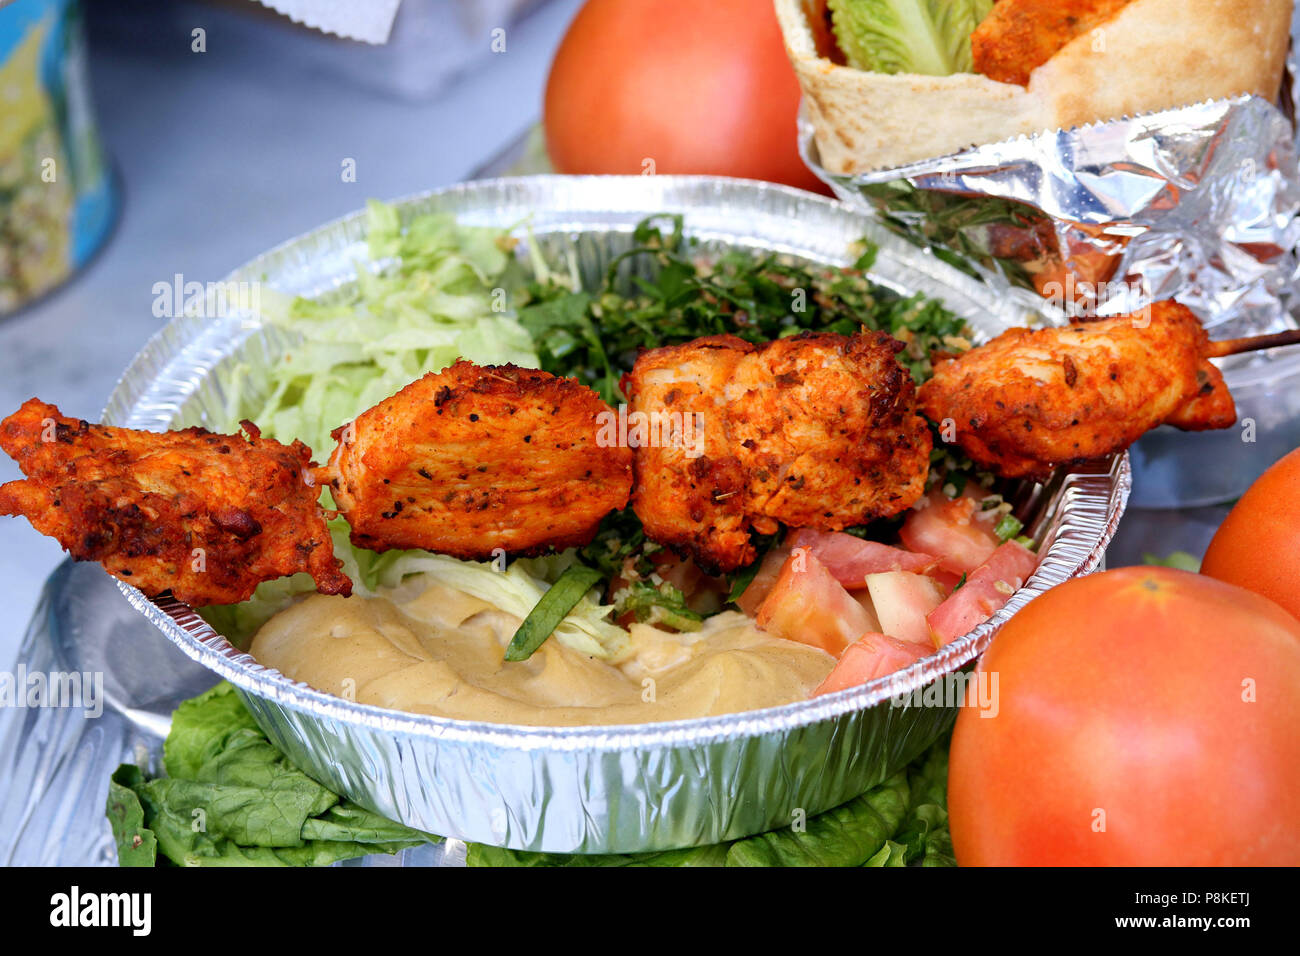 Chicken kebab platter with hummus, tomato and tabbouleh salad Stock Photo